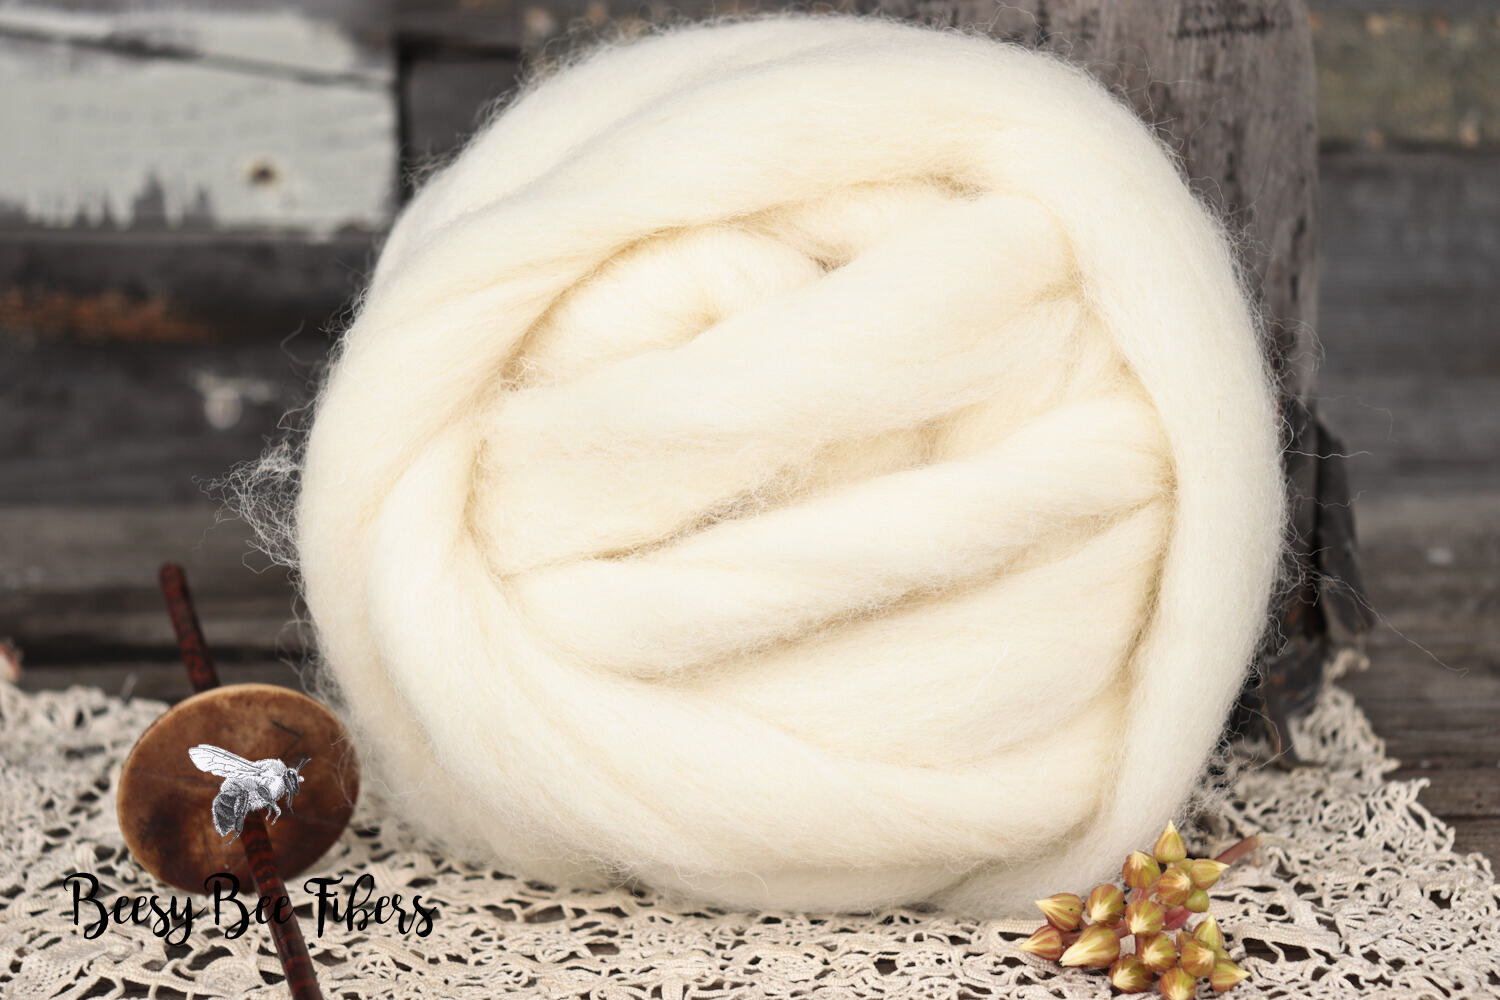 Desert Breeze 100% Natural White Wool Roving Top, USA Mill, 29.5 Micron, Un-Dyed, 8 oz Corriedale, Beige